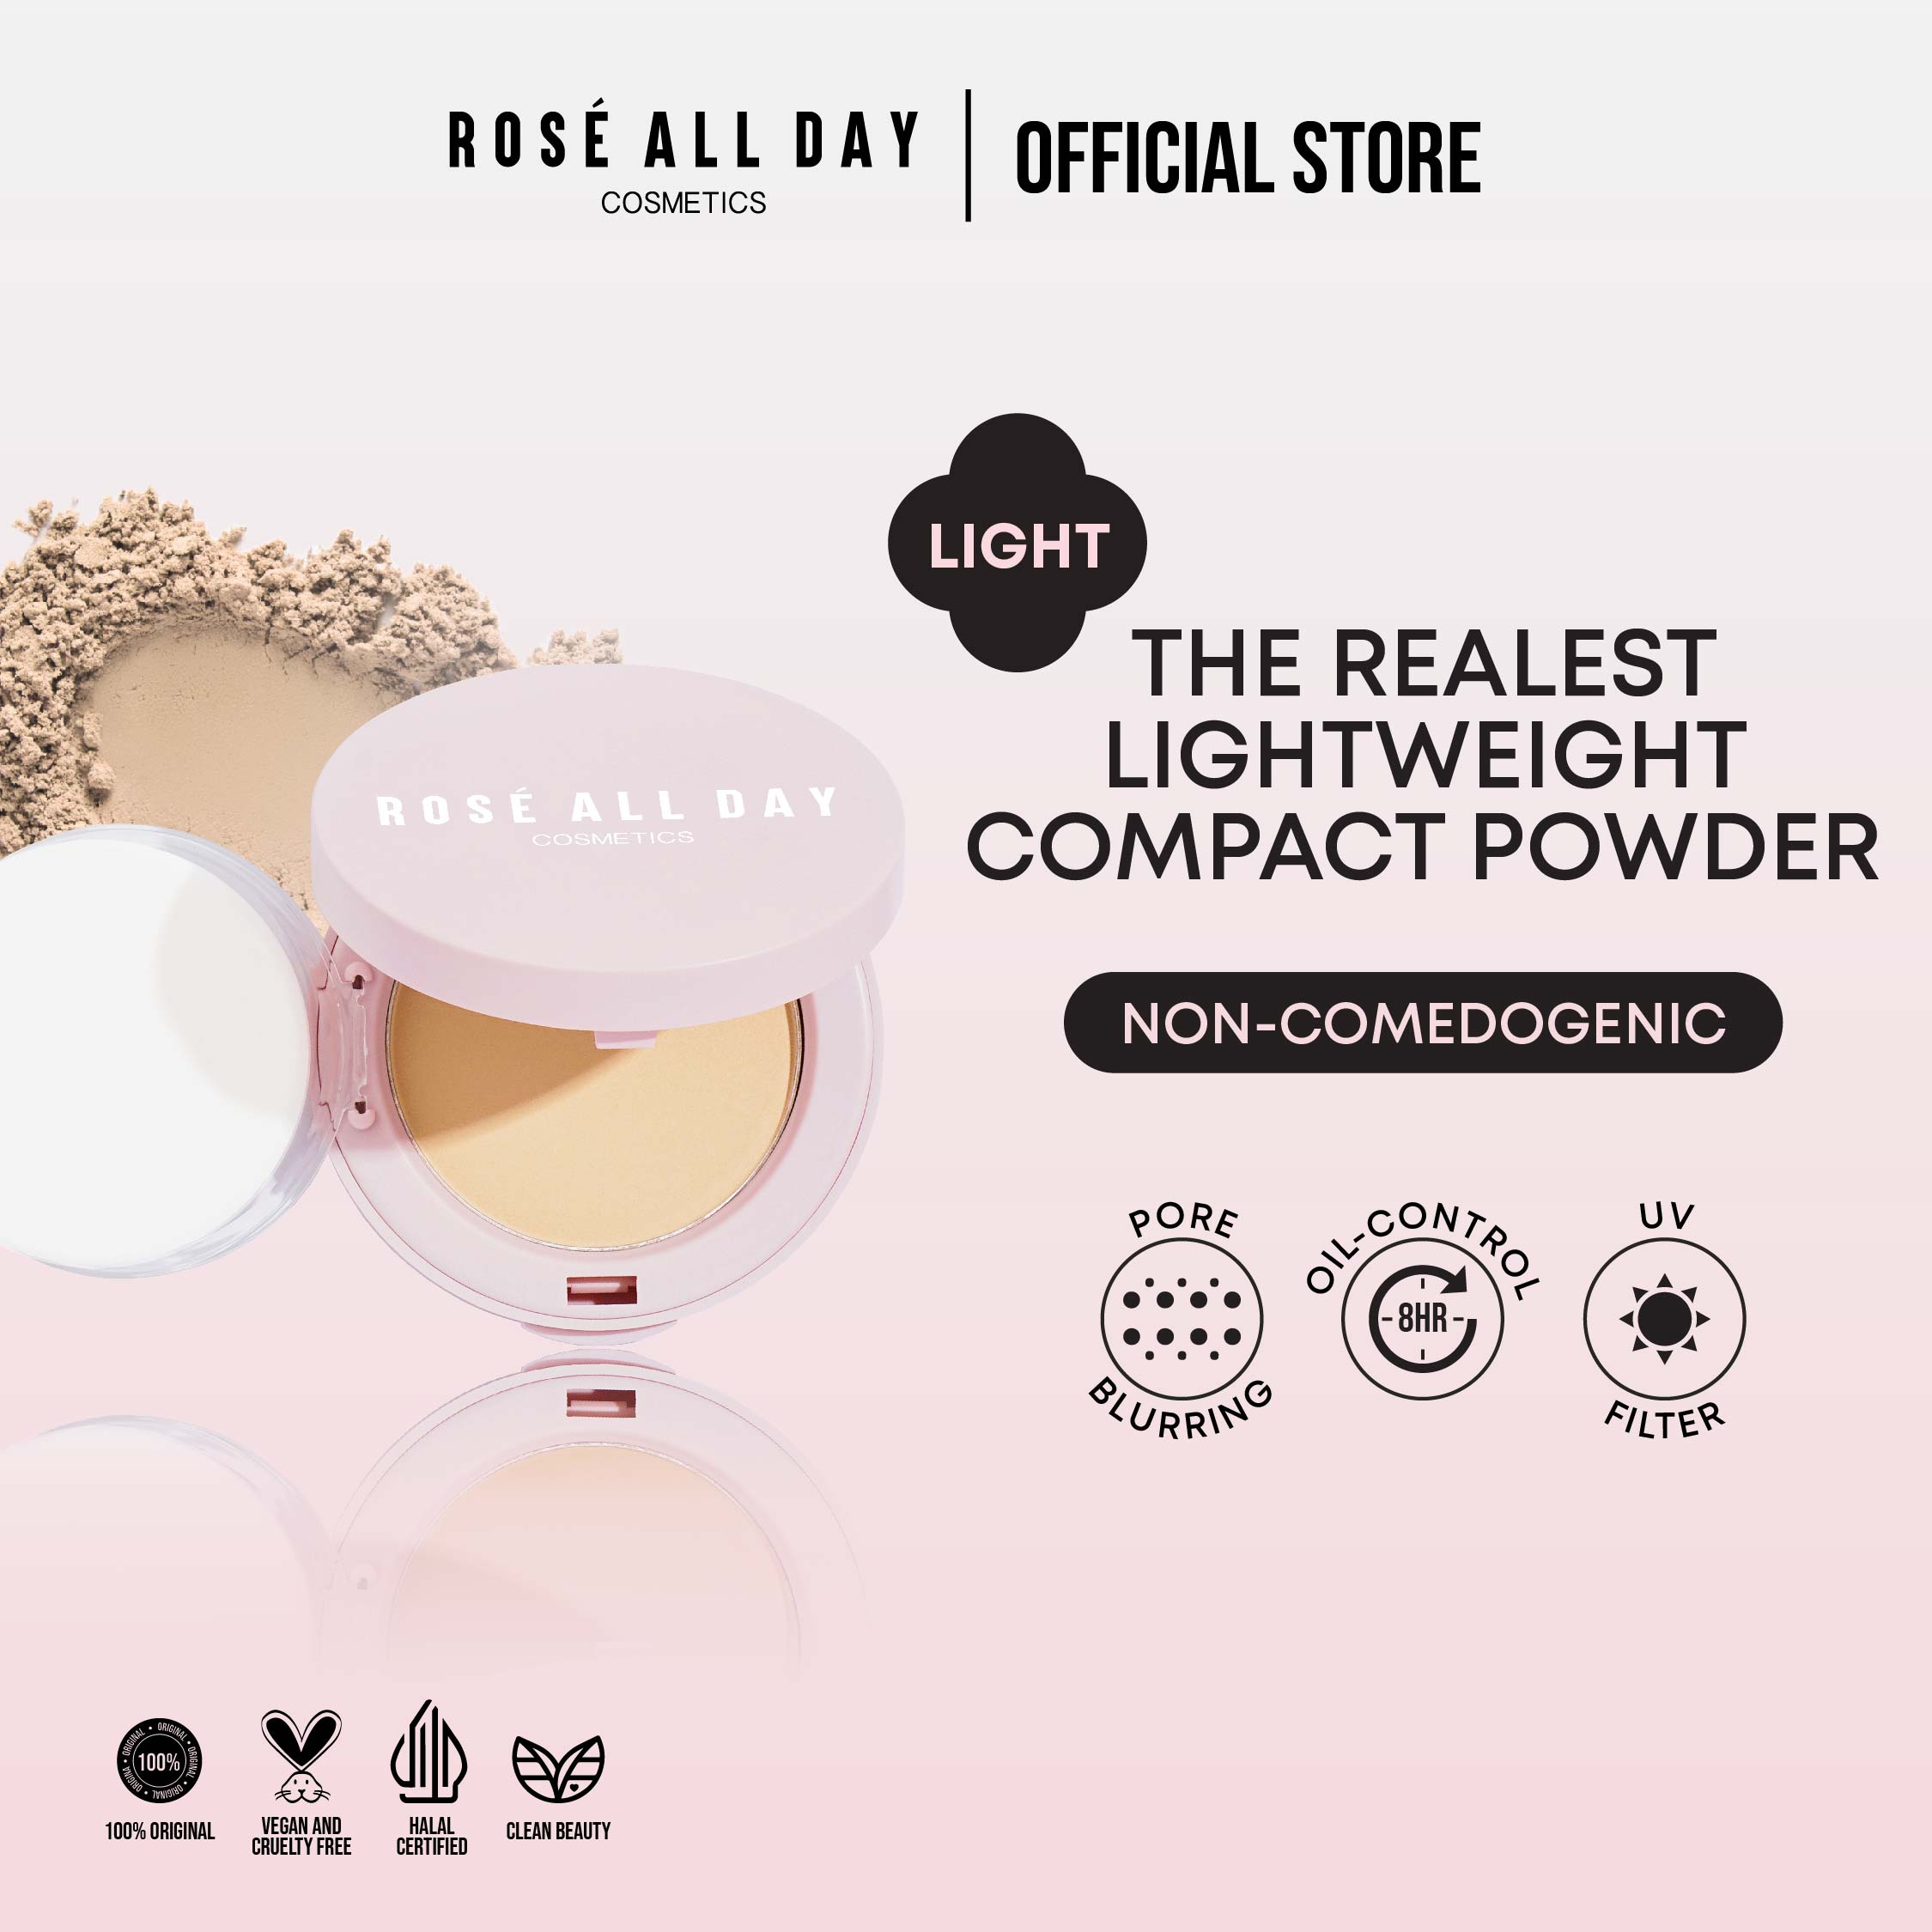 Rose All Day The Realest Lightweight Compact Powder in Light